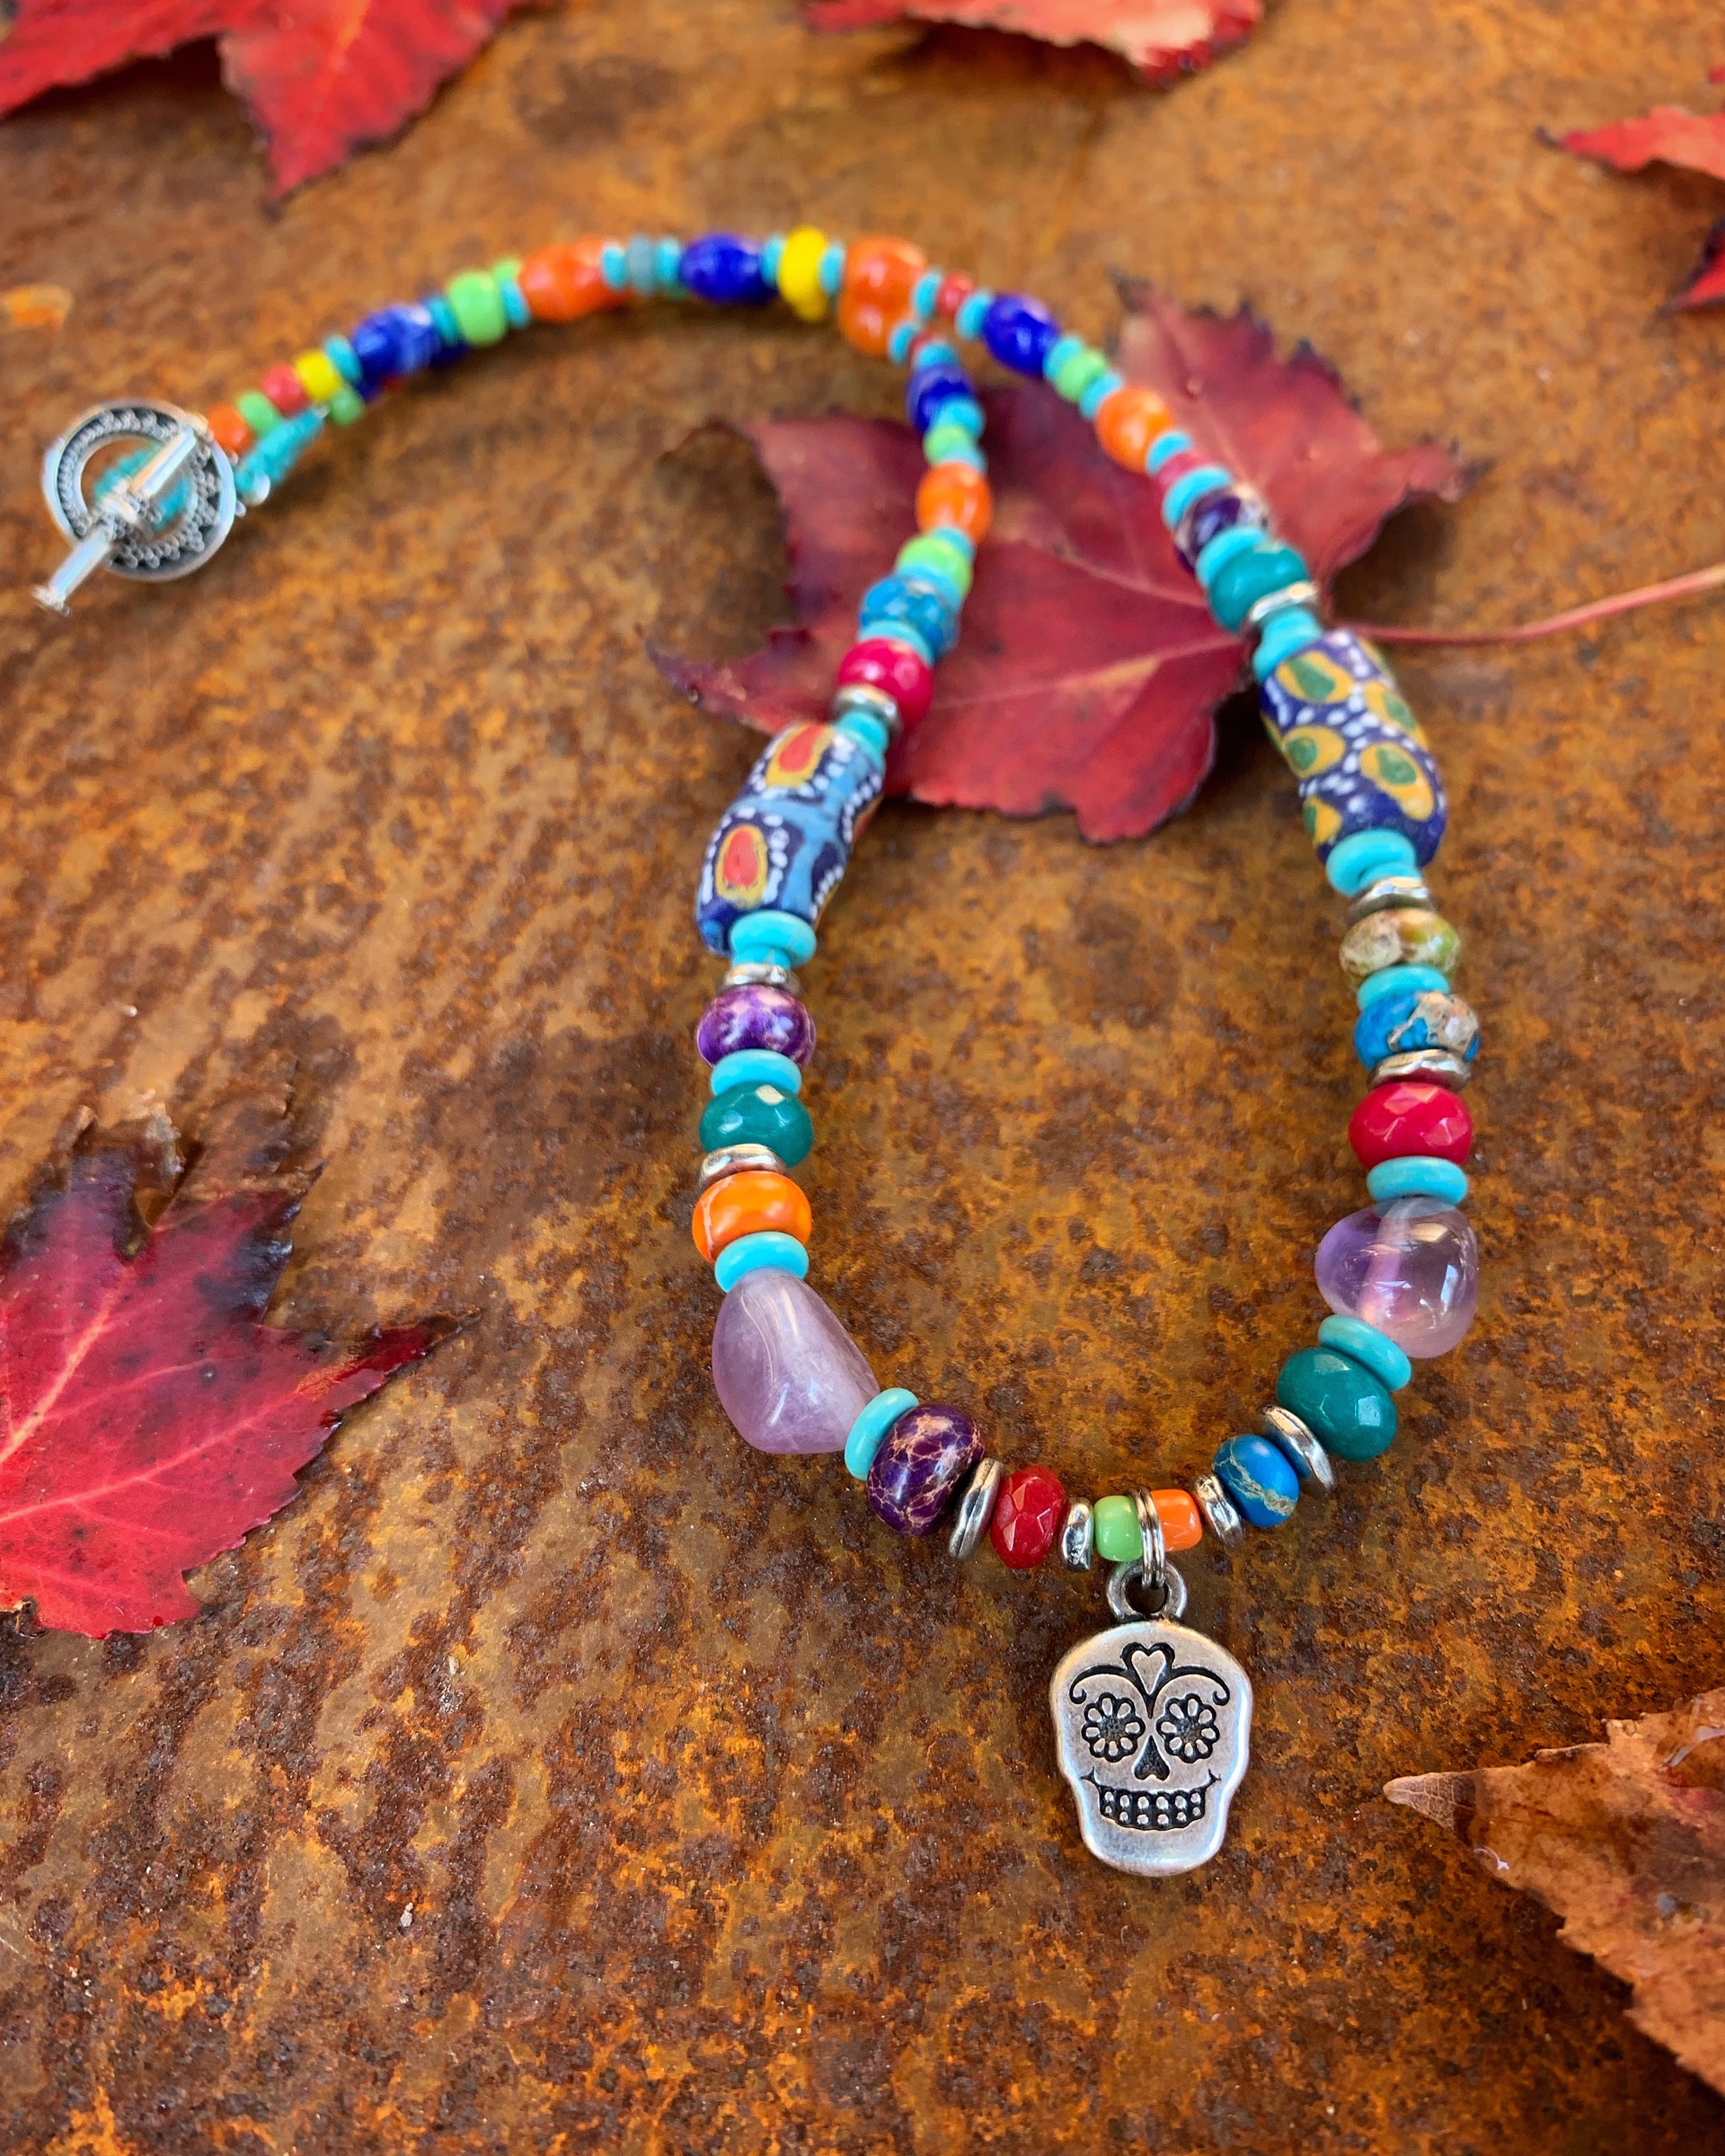 K676 Sugar Skull Charm Necklace by Kelly Ormsby